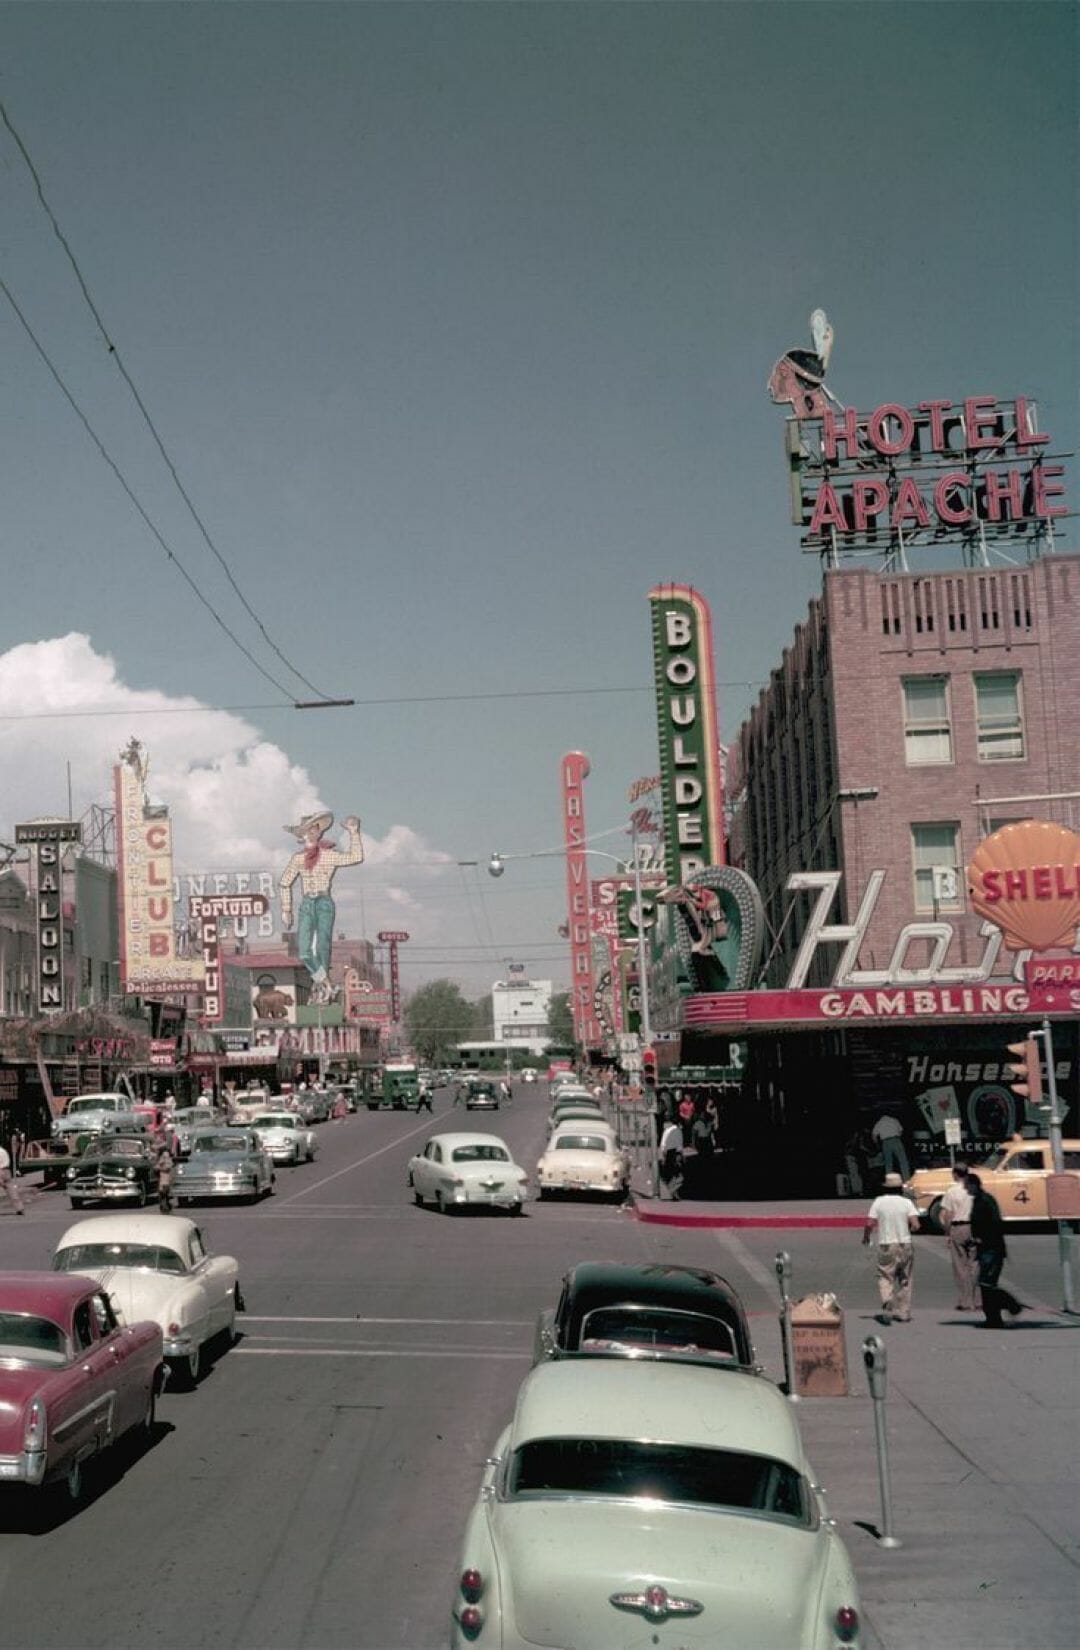 A street with cars and buildings on it - Retro, Las Vegas, vintage, travel, 50s